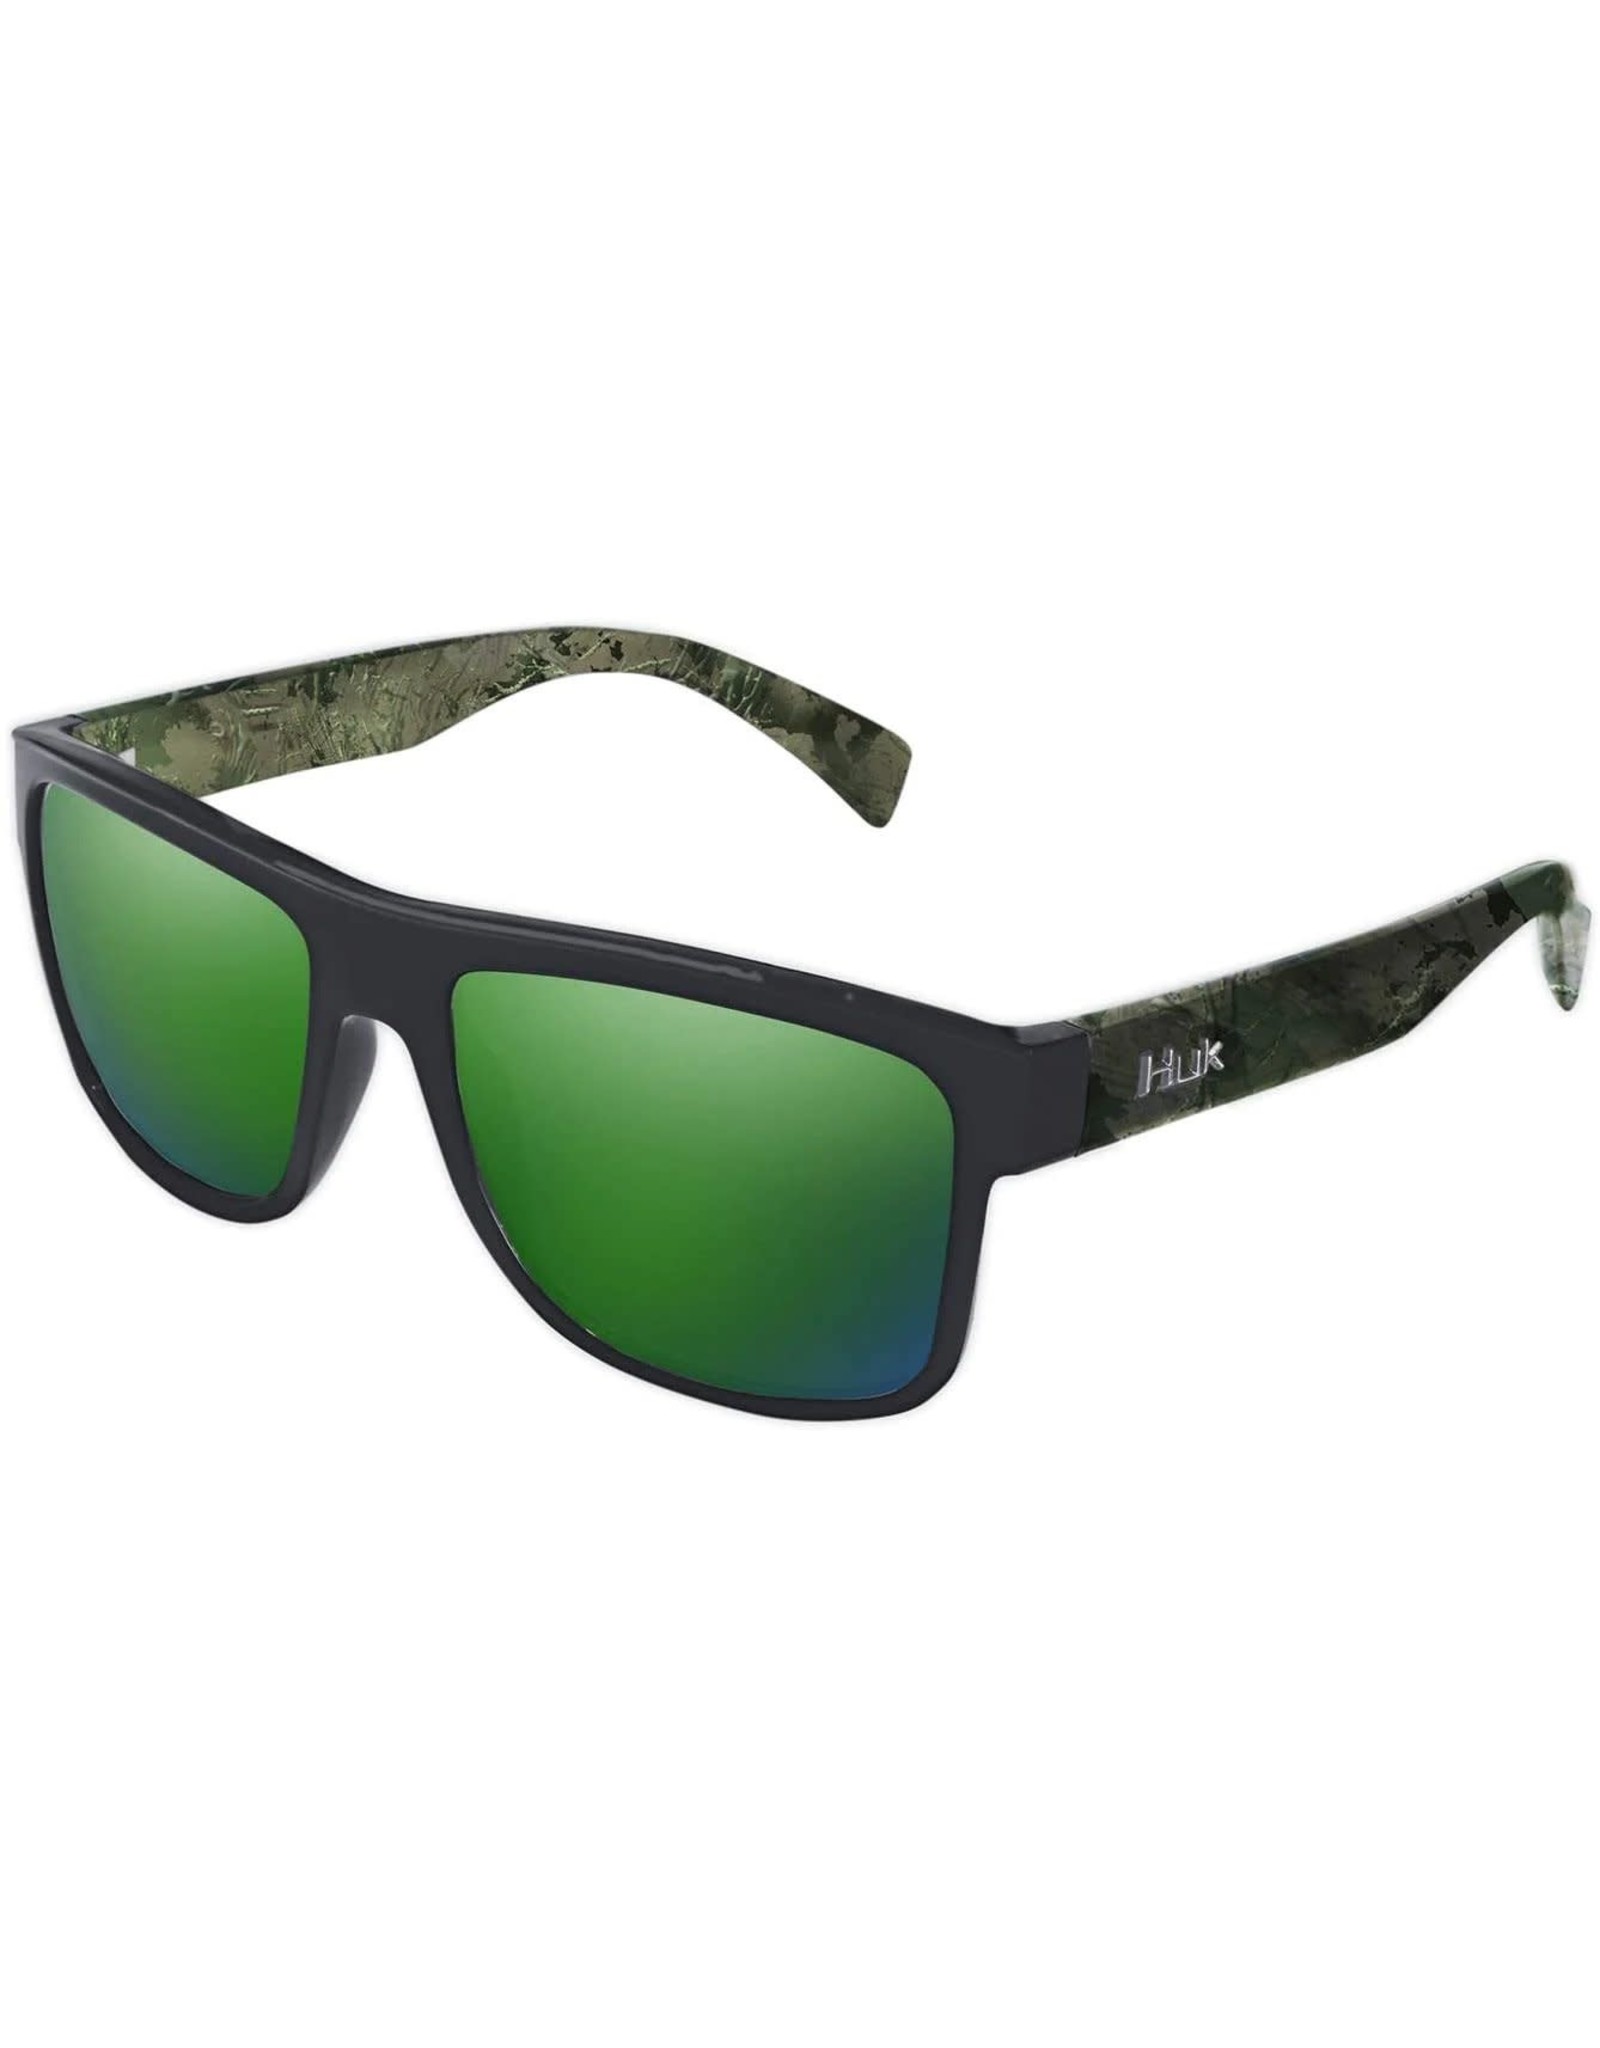 Huk Clinch Polarized Sunglasses, Green Mirror Lens / Southern Tier Frame by Huk